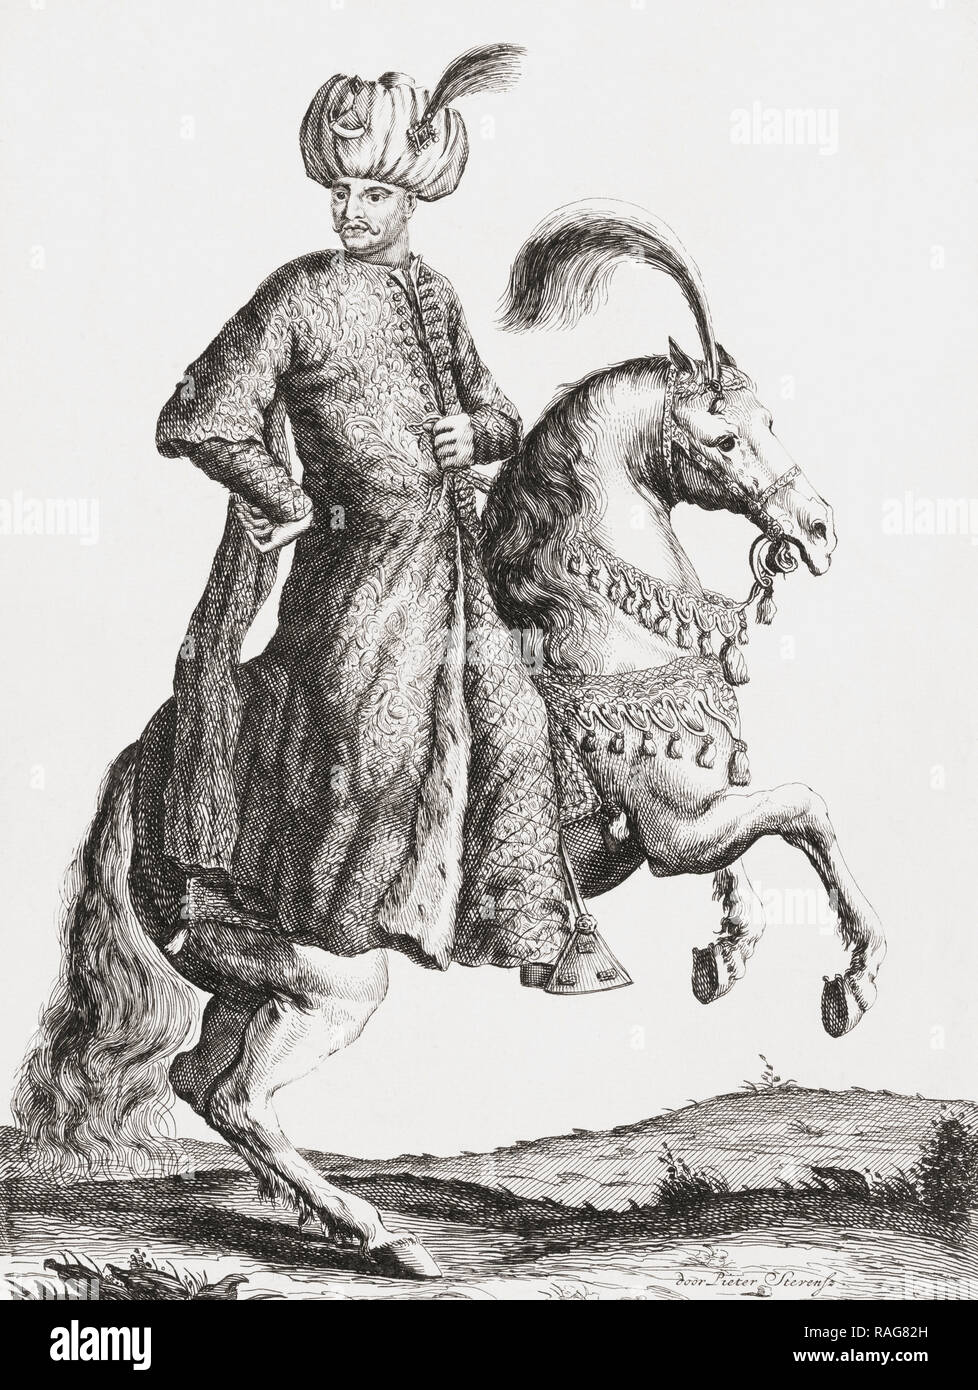 Mehmed IV, also known as Mehmet IV and Mehmed or Mehmet the Hunter, 1642-1693.  Sultan of the Ottoman Empire. After an 18th century print. Stock Photo